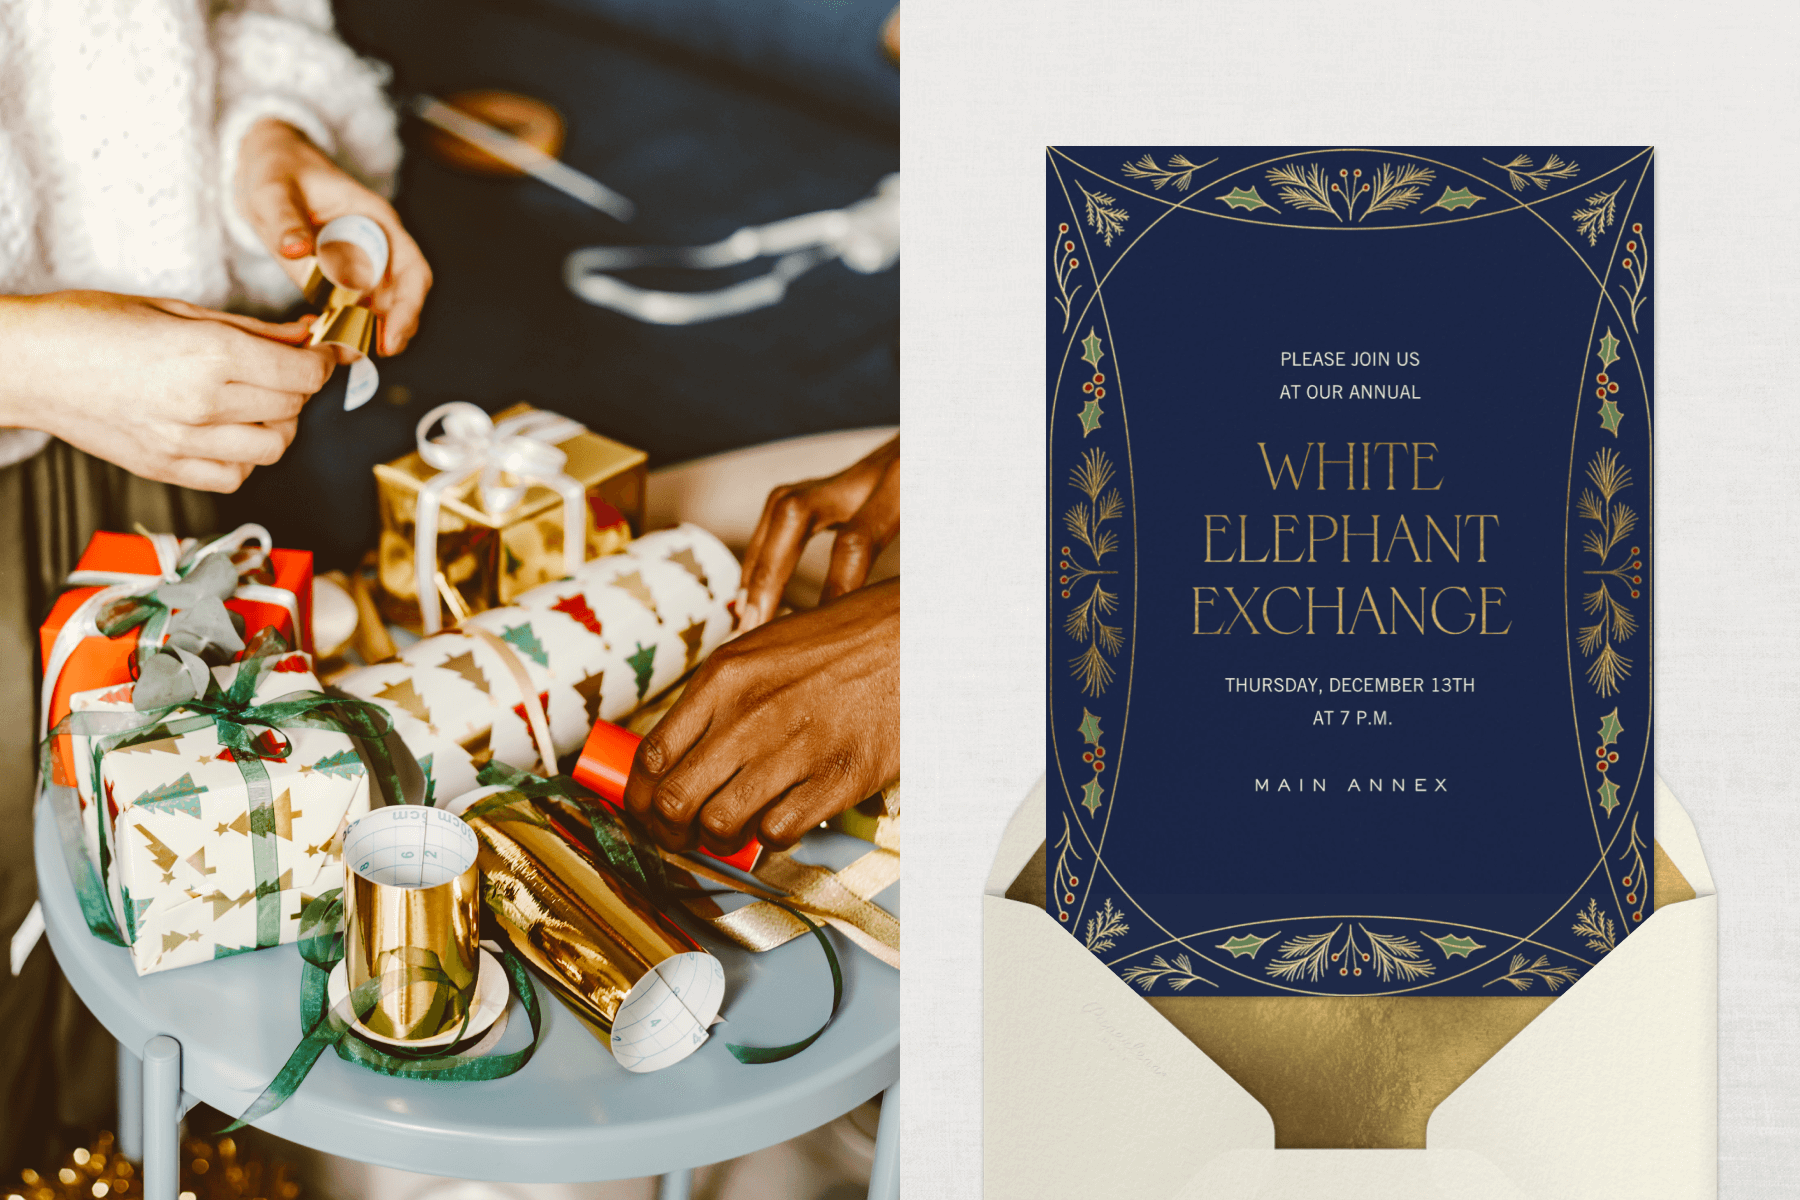 Left: Two people wrap presents in Christmas wrapping paper with gold and green ribbons. Right: A navy blue invitations for a “White elephant exchange” has an Art Deco-inspired border with delicate gold holly leaves and fir sprigs.